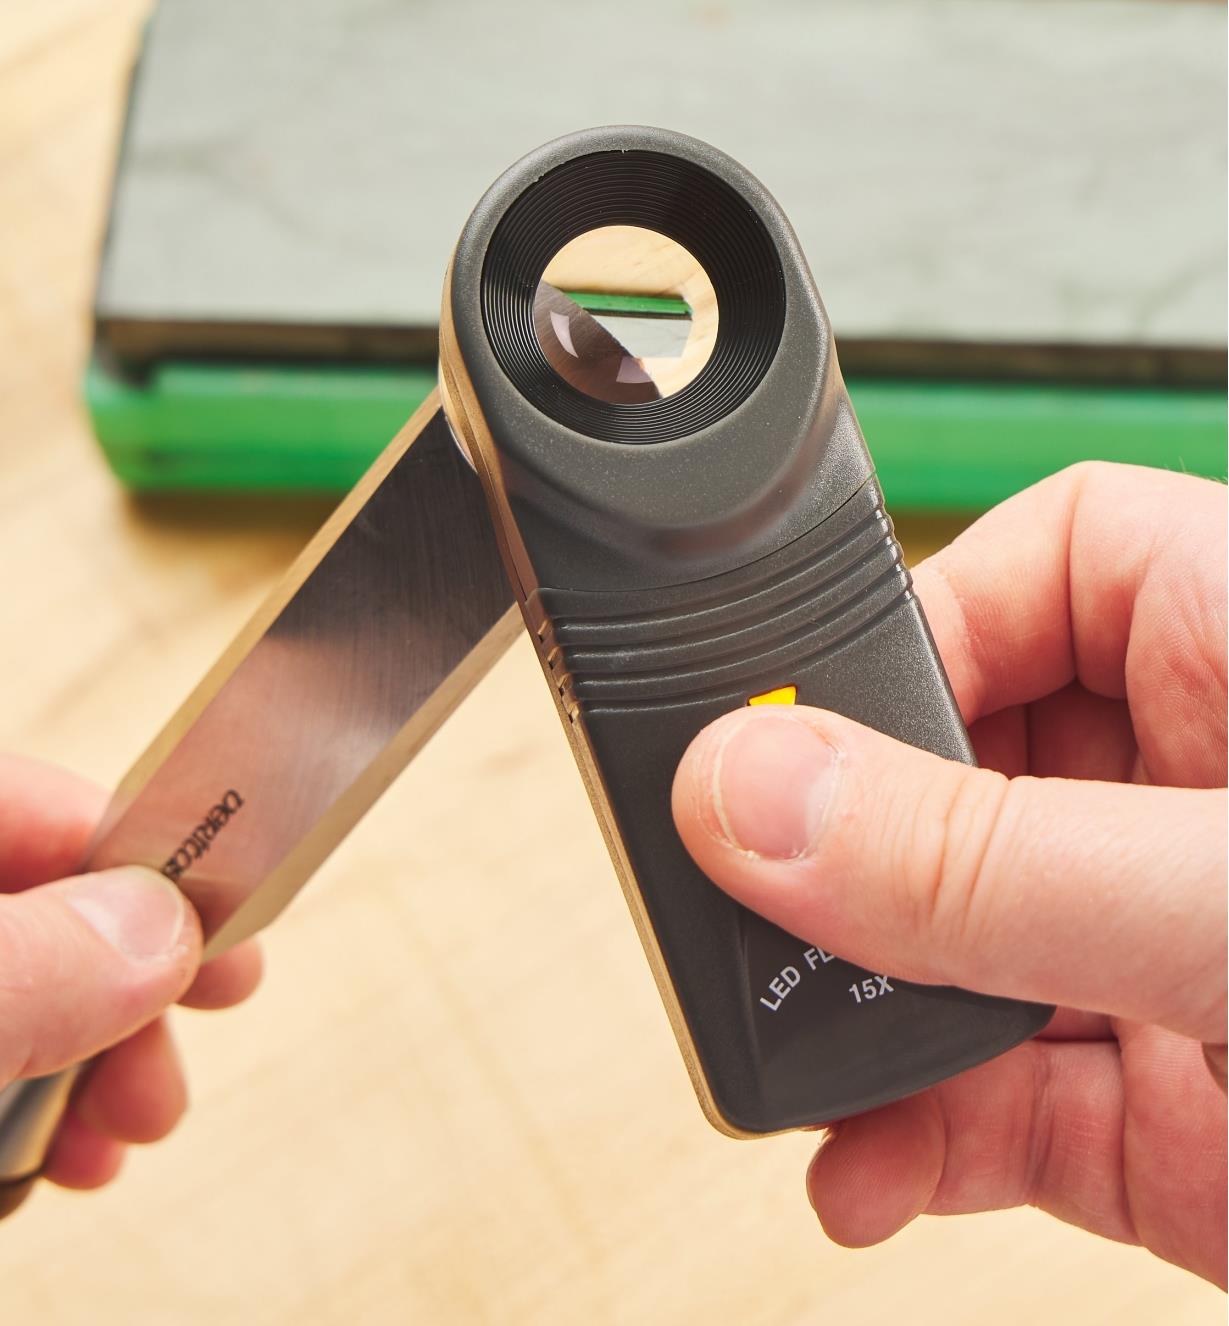 Using a 15-Power Lighted Loupe to examine a chisel blade